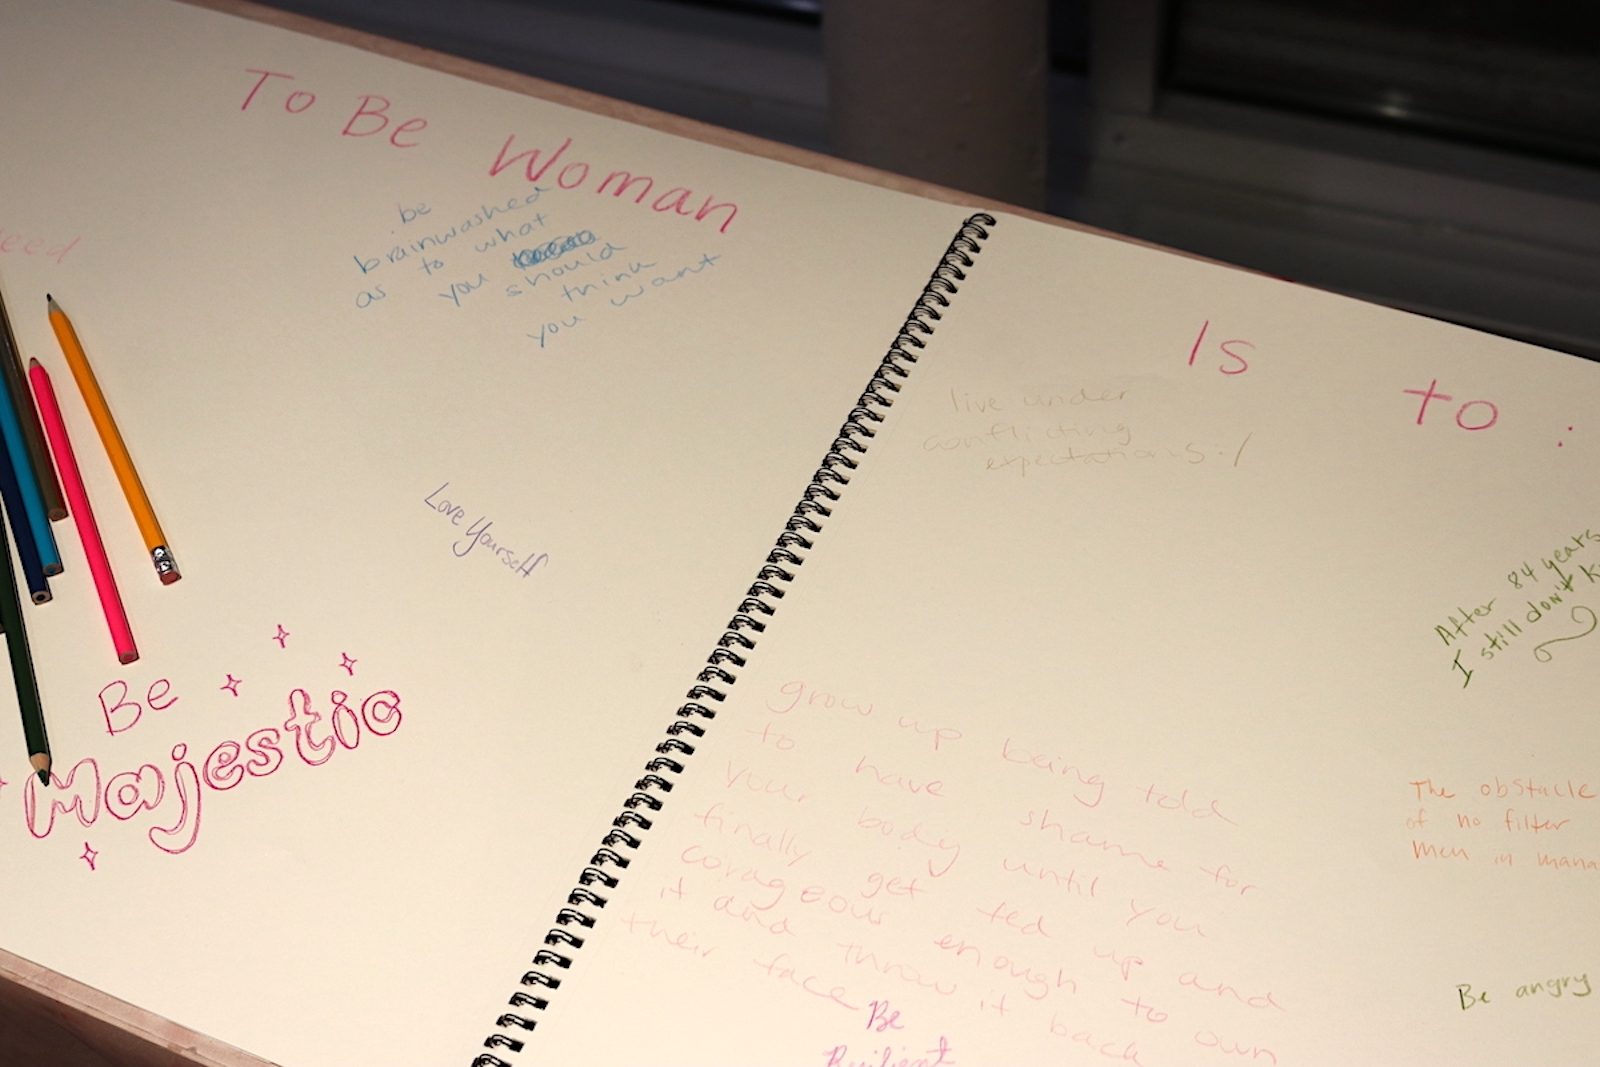 A notebook with the words "To Be Woman Is To:" at the top and various messages written including "Love Yourself" and "Be Majestic"